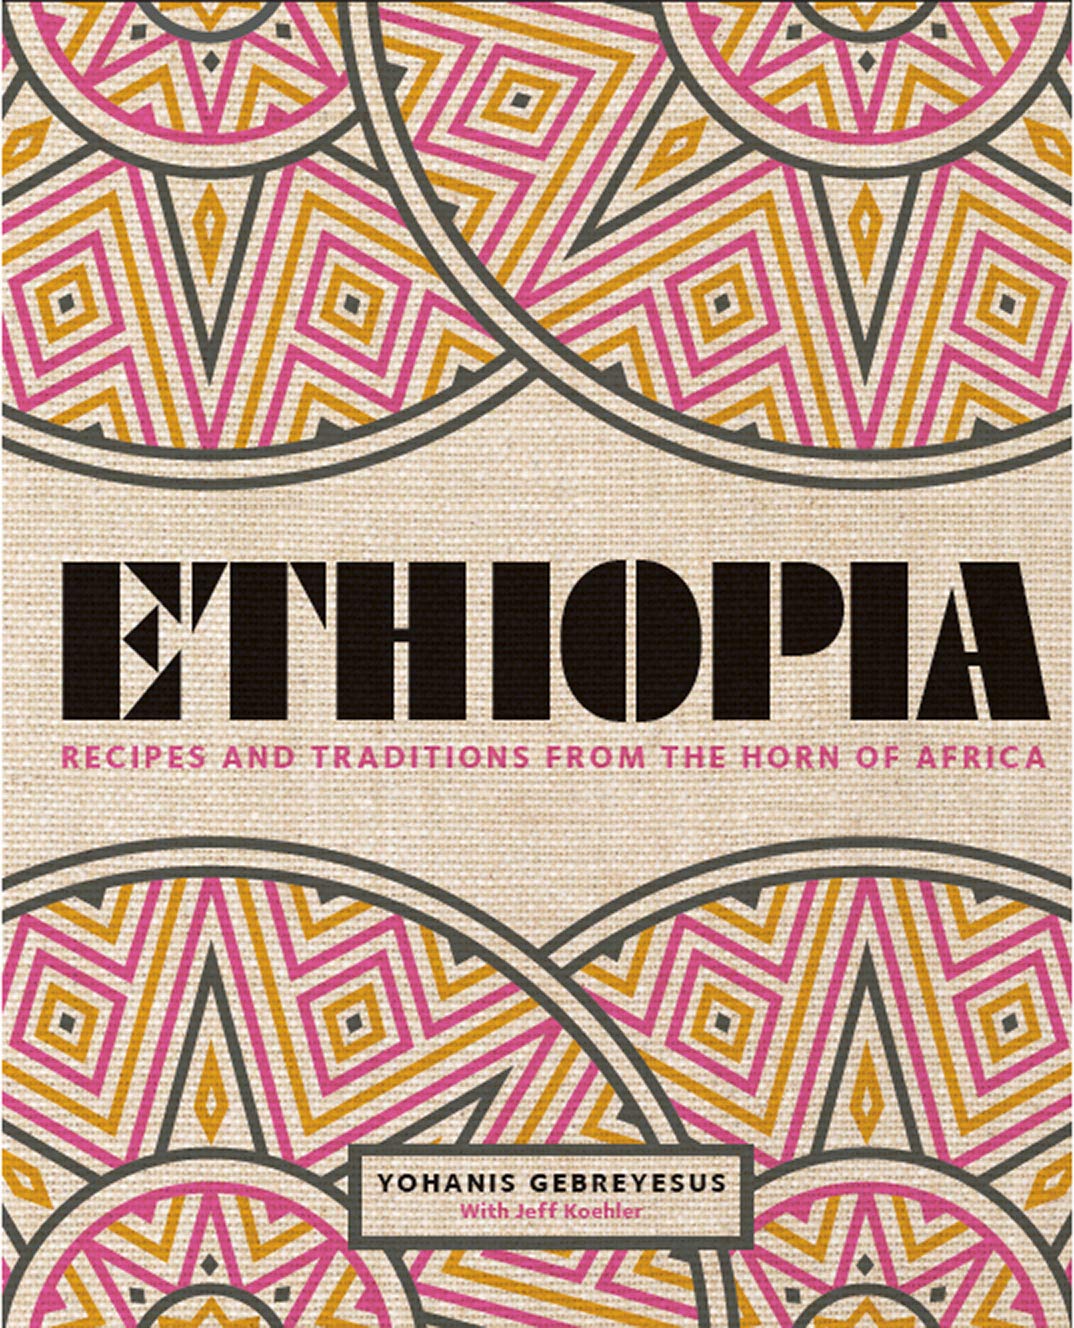 Ethiopia: Recipes and Traditions from the Horn of Africa (Yohanis Gebreyesus)